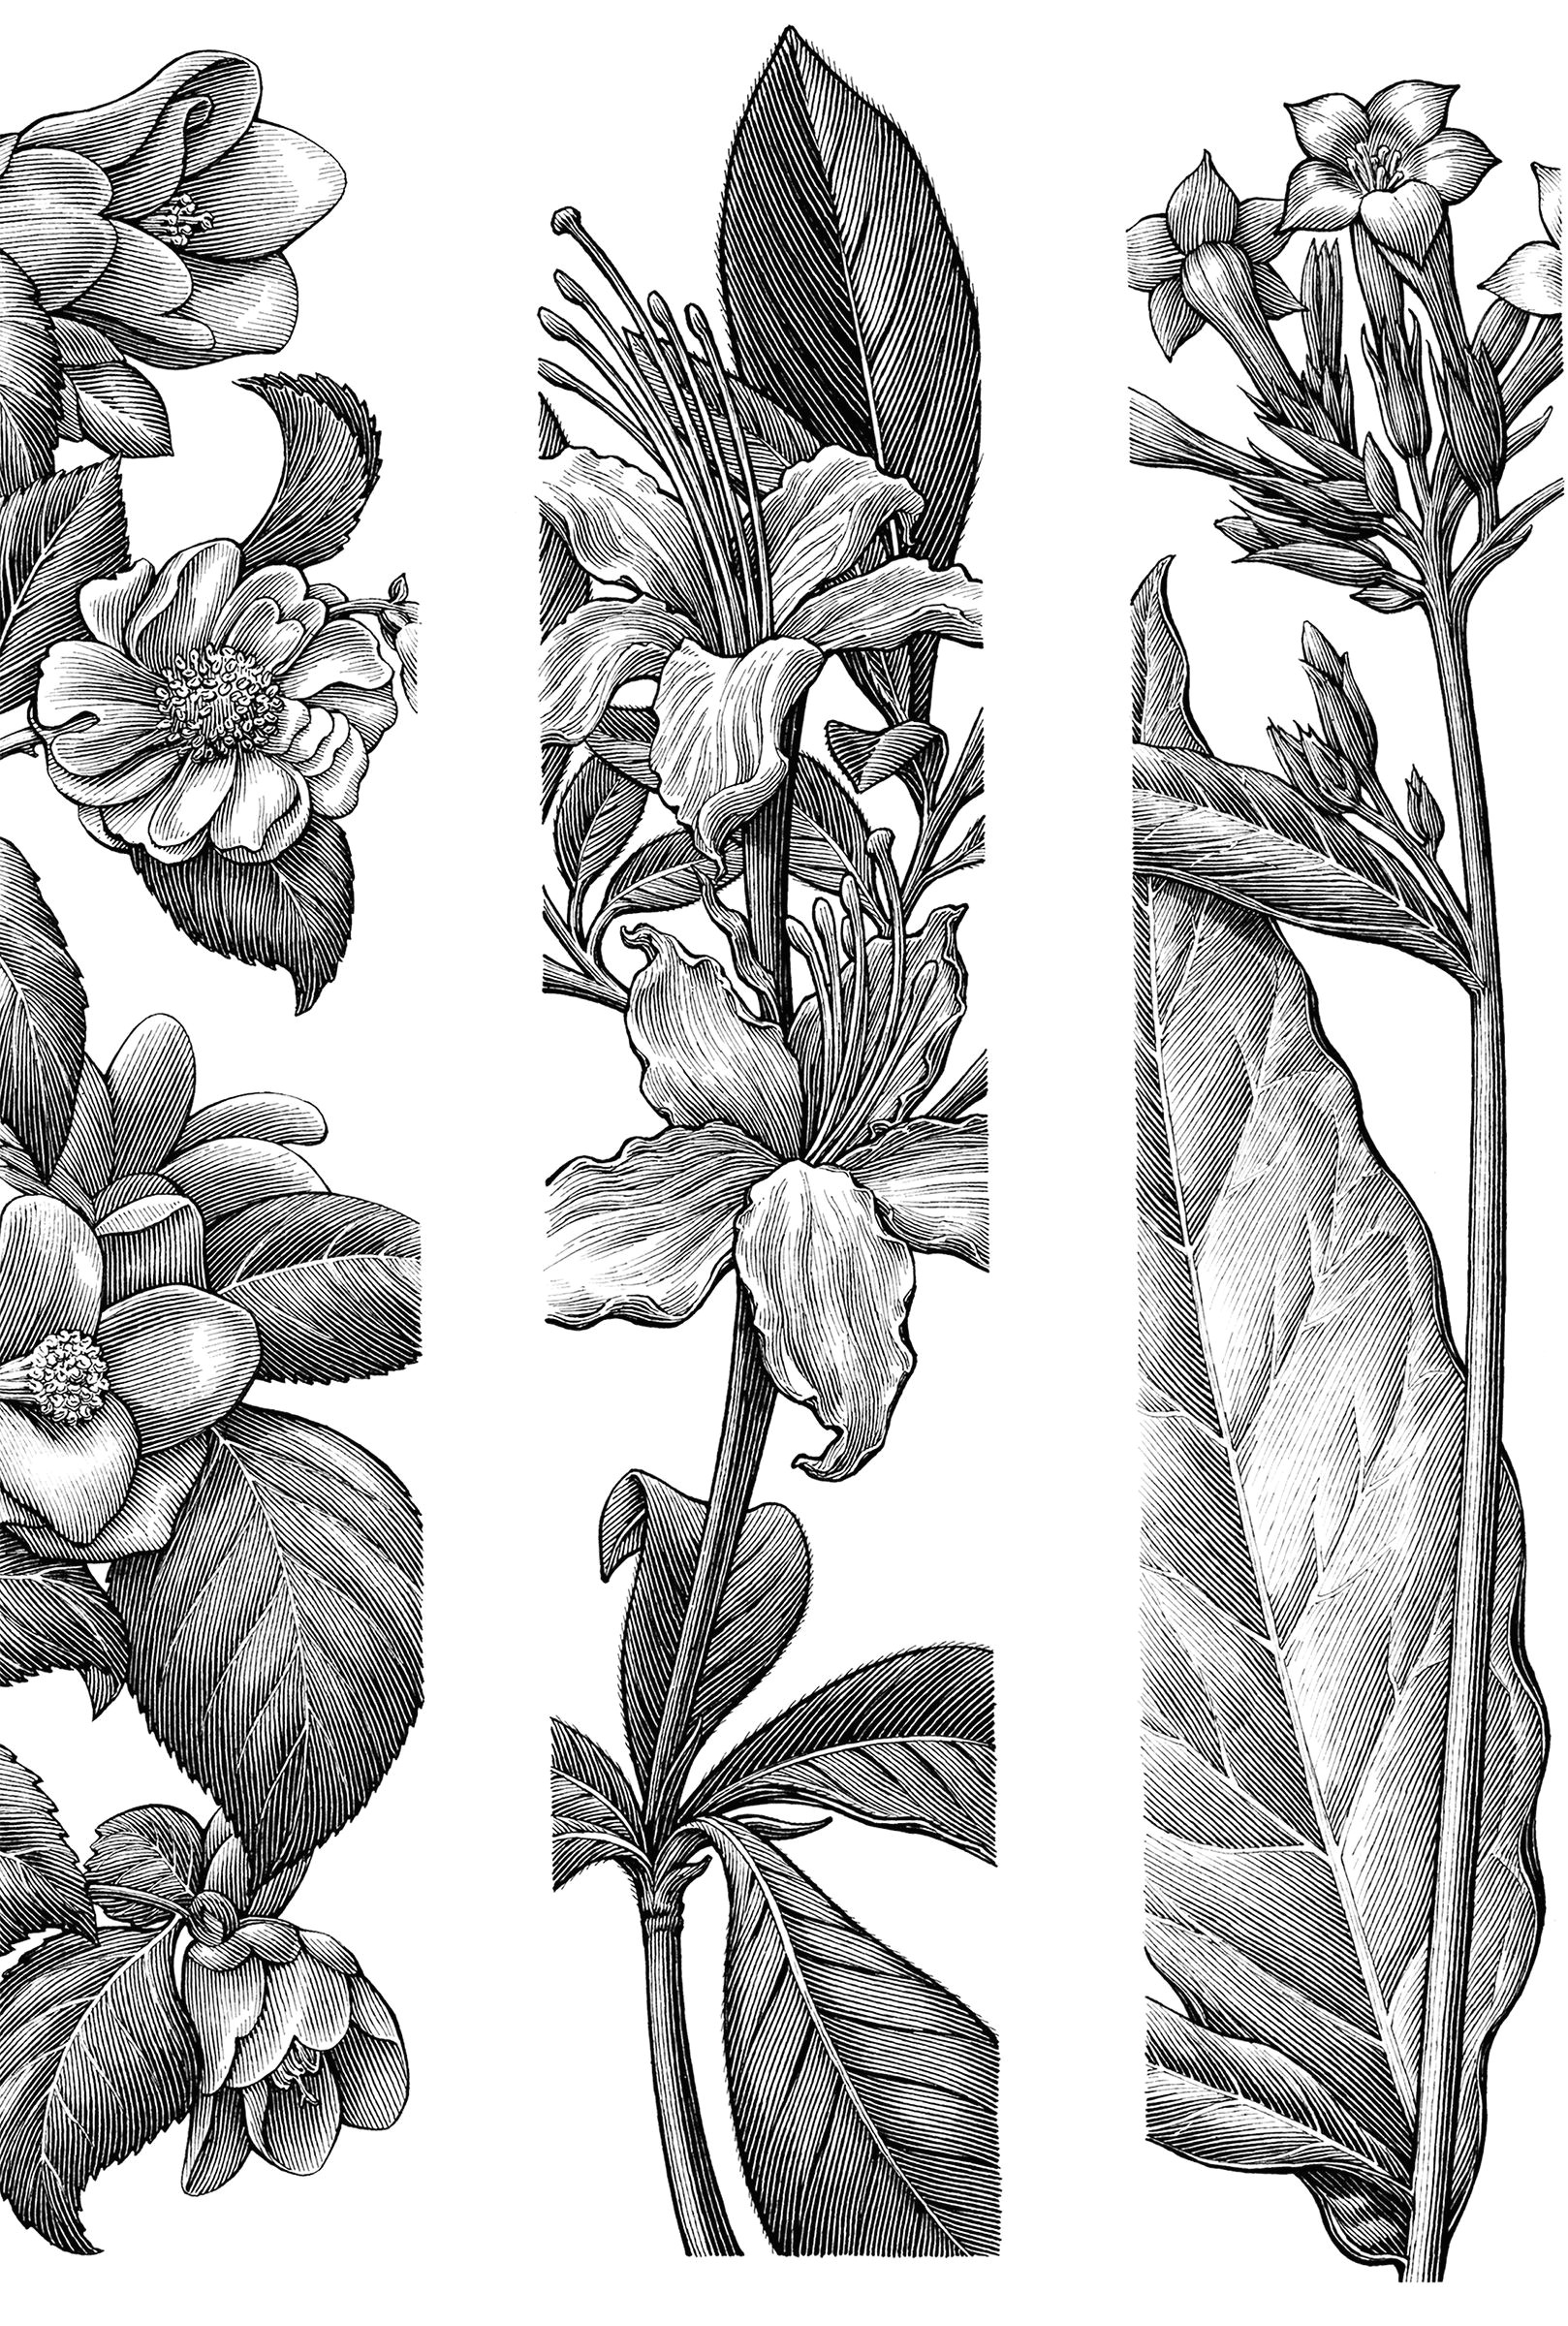 Drawing Tumblr Plants Pin by Amarie M On Art In 2019 Botanical Gardens Drawings